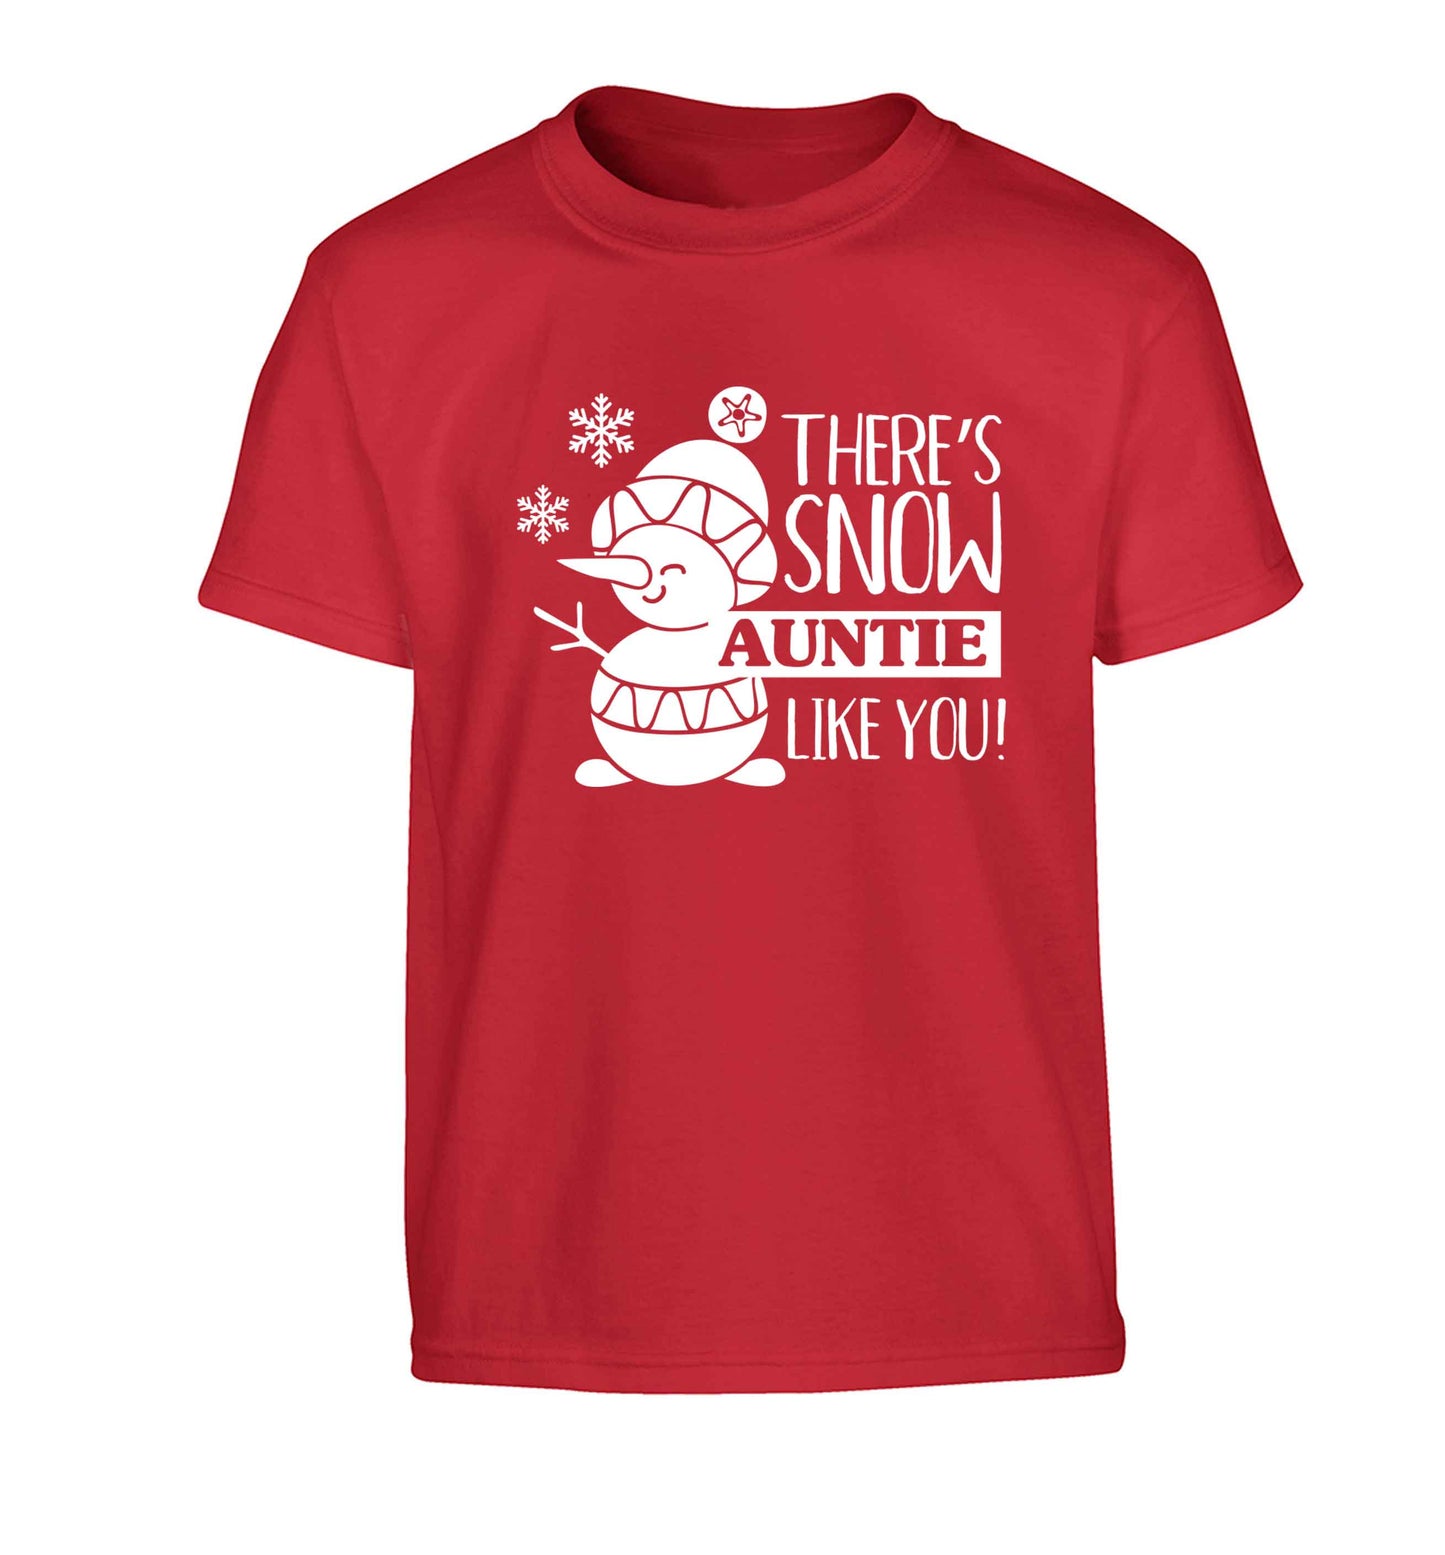 There's snow auntie like you Children's red Tshirt 12-13 Years